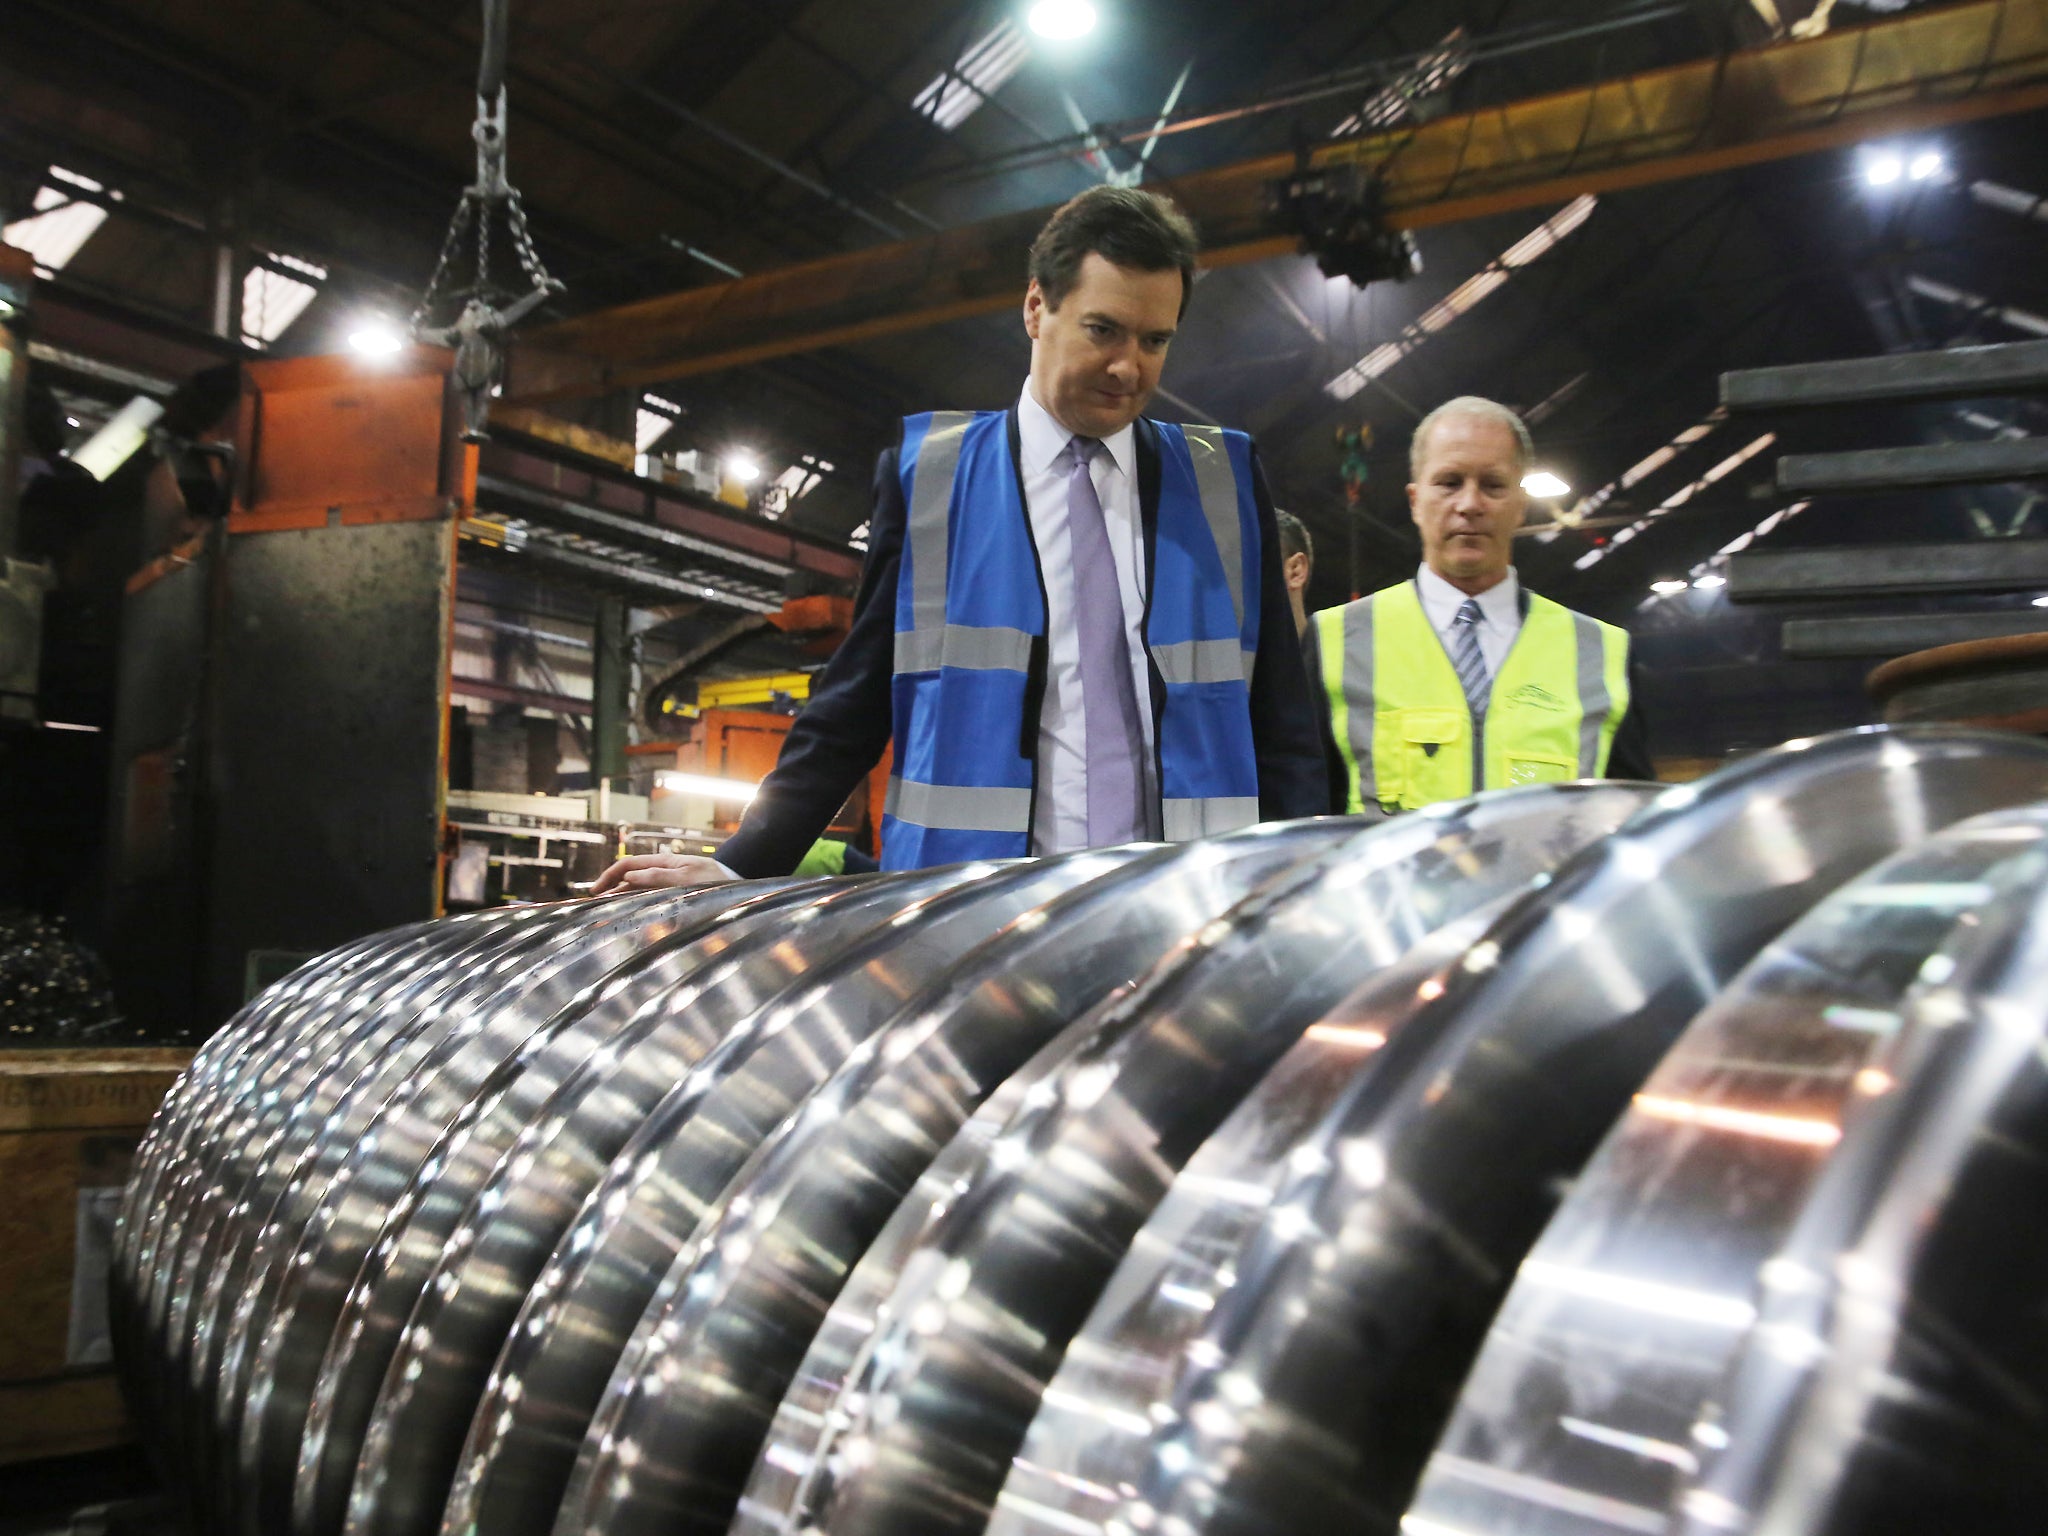 The Government hopes that the HS2 project will help to boost manufacturing. In January, the Chancellor George Osborne toured the train wheel manufacturers Lucchini UK in Manchester as details were released details of the next phase of the £32bn high-speed